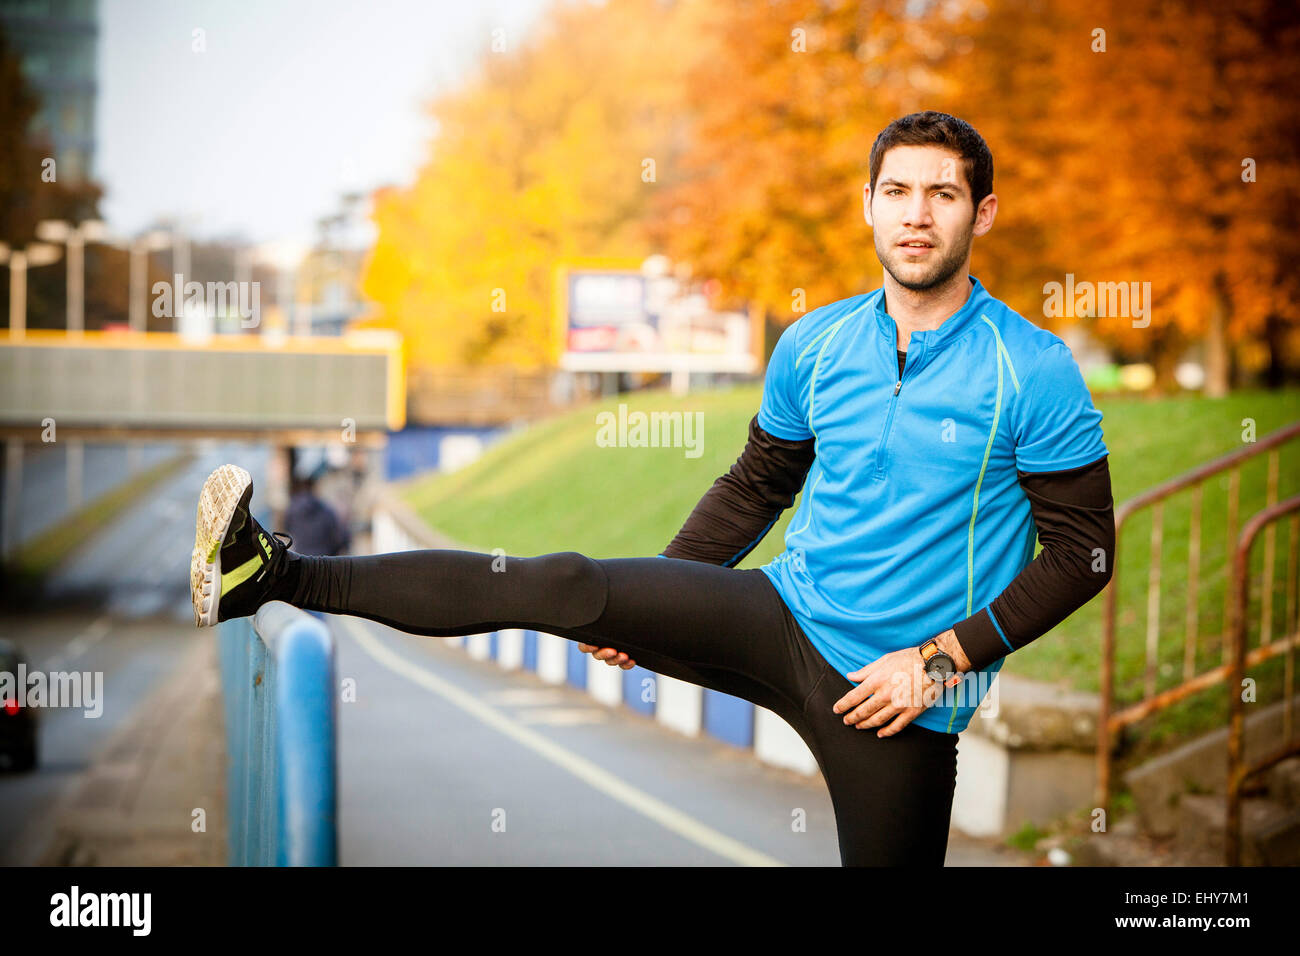 Male runner stretching and warming up in city Stock Photo